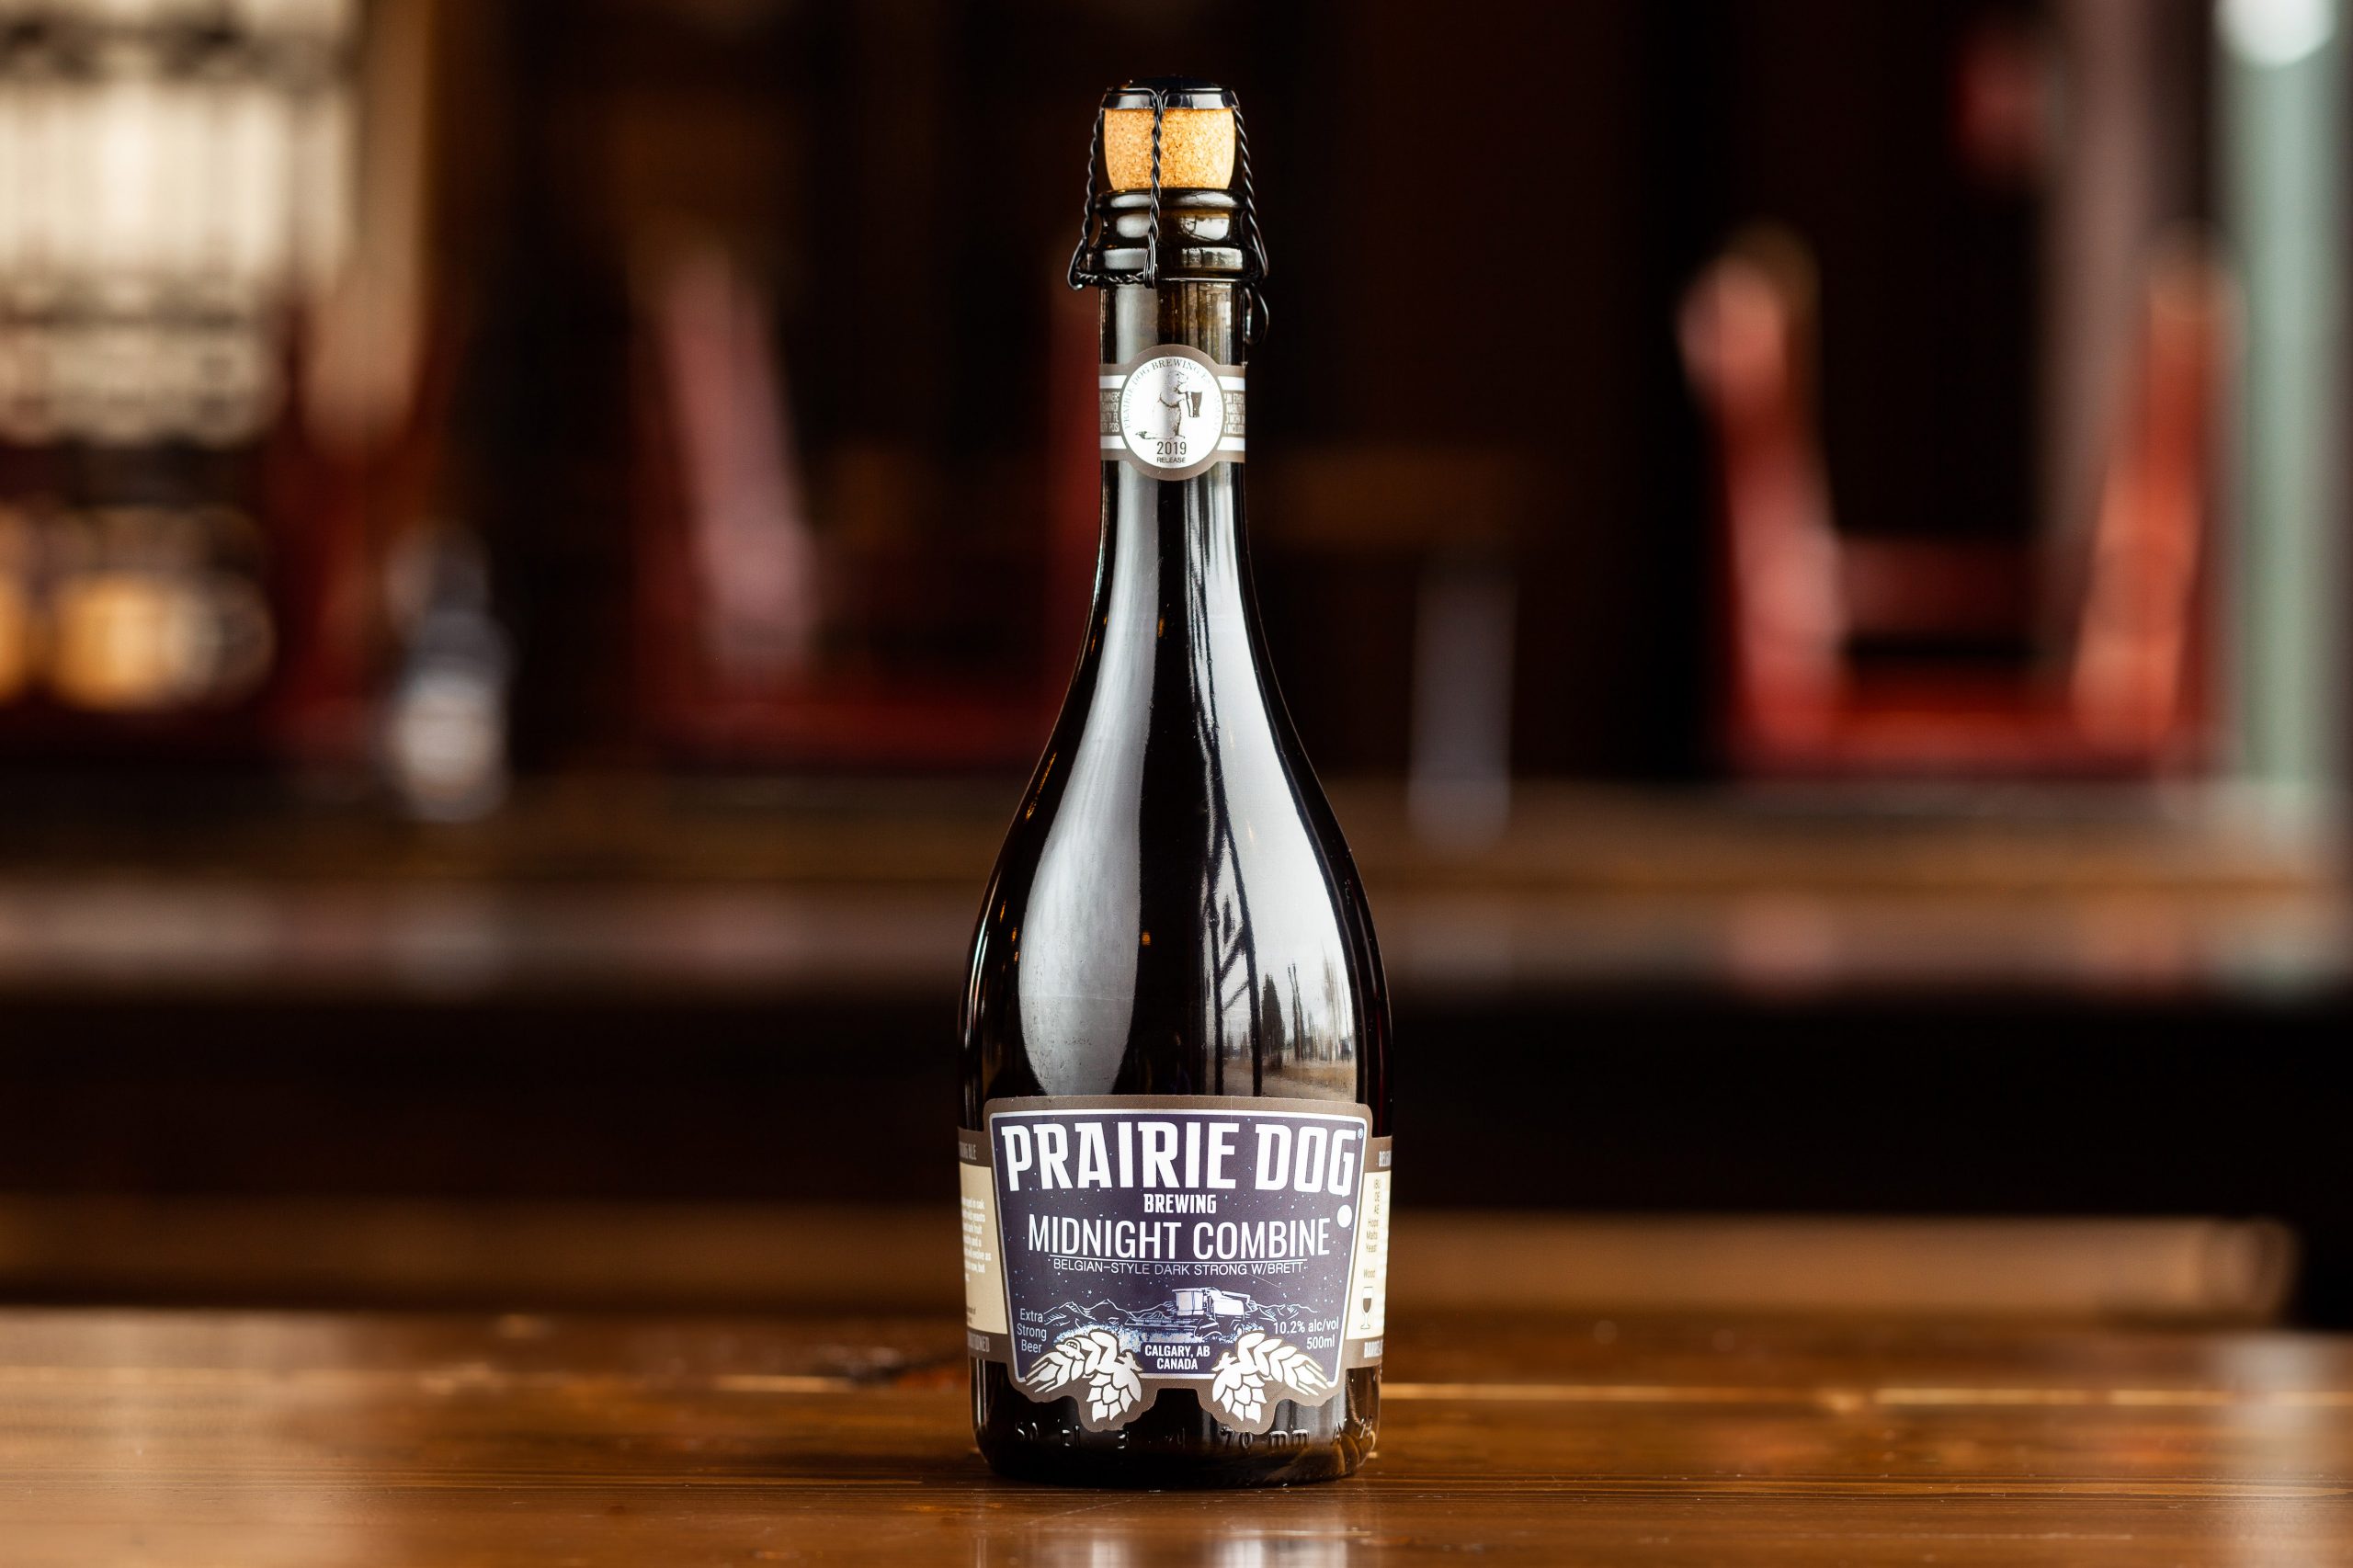 A 500-ml bottle of Midnight Combine, Prairie Dog's premier Belgian-style barrel-aged dark strong ale, brewed with a mixed fermentation of microorganisms.